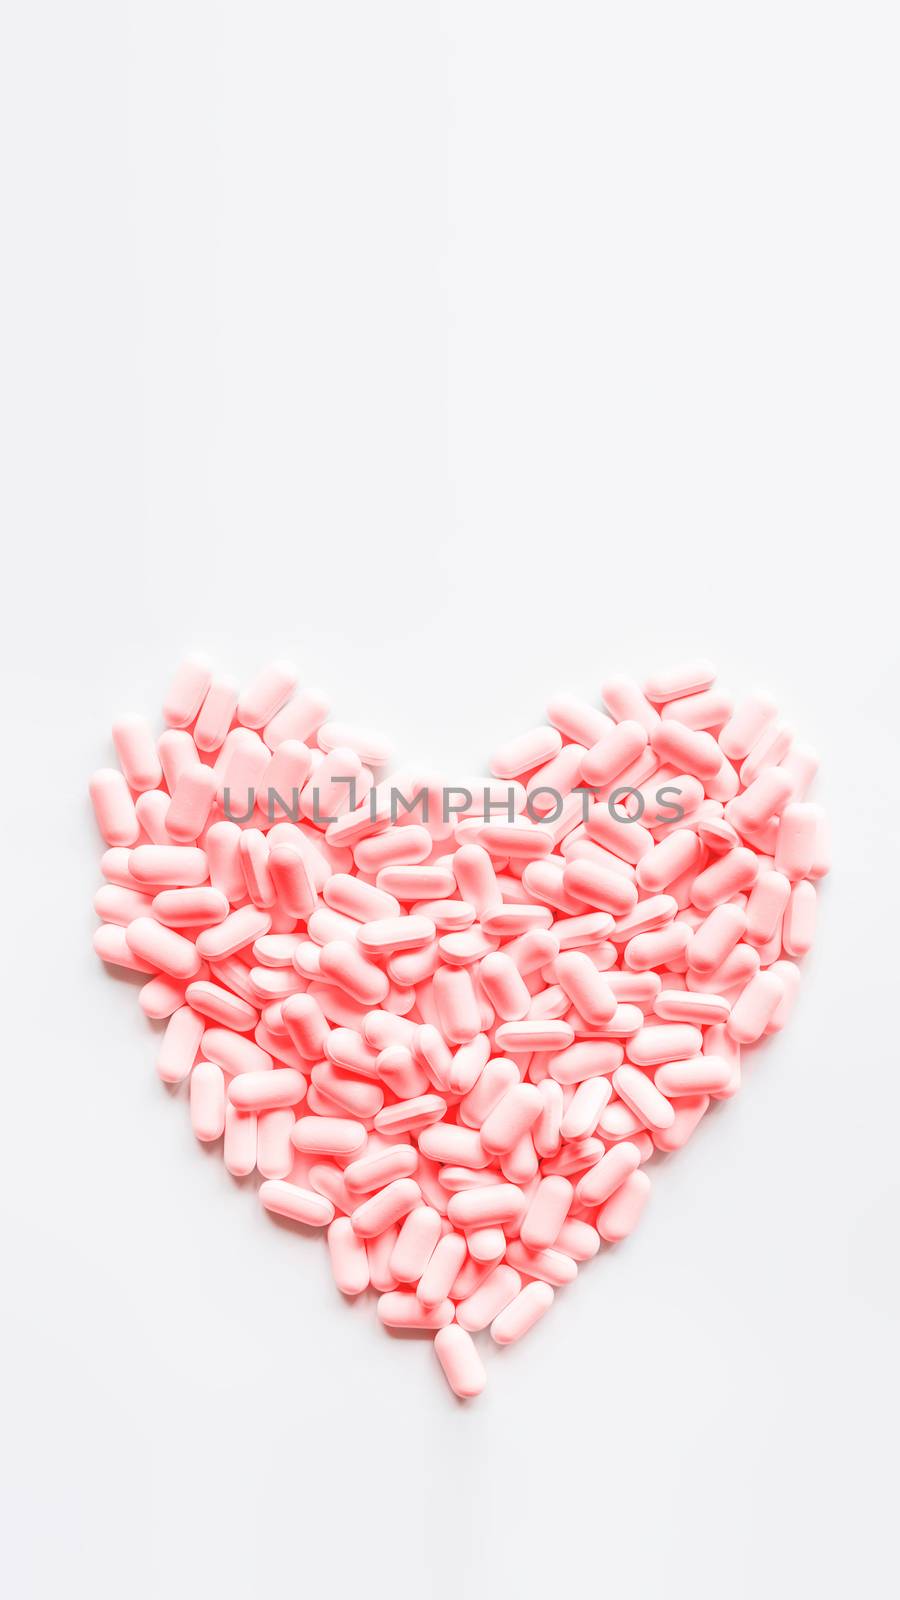 Heart made of pink pills. Top view on drugs in shape of heart. Flat lay white background with copy space.